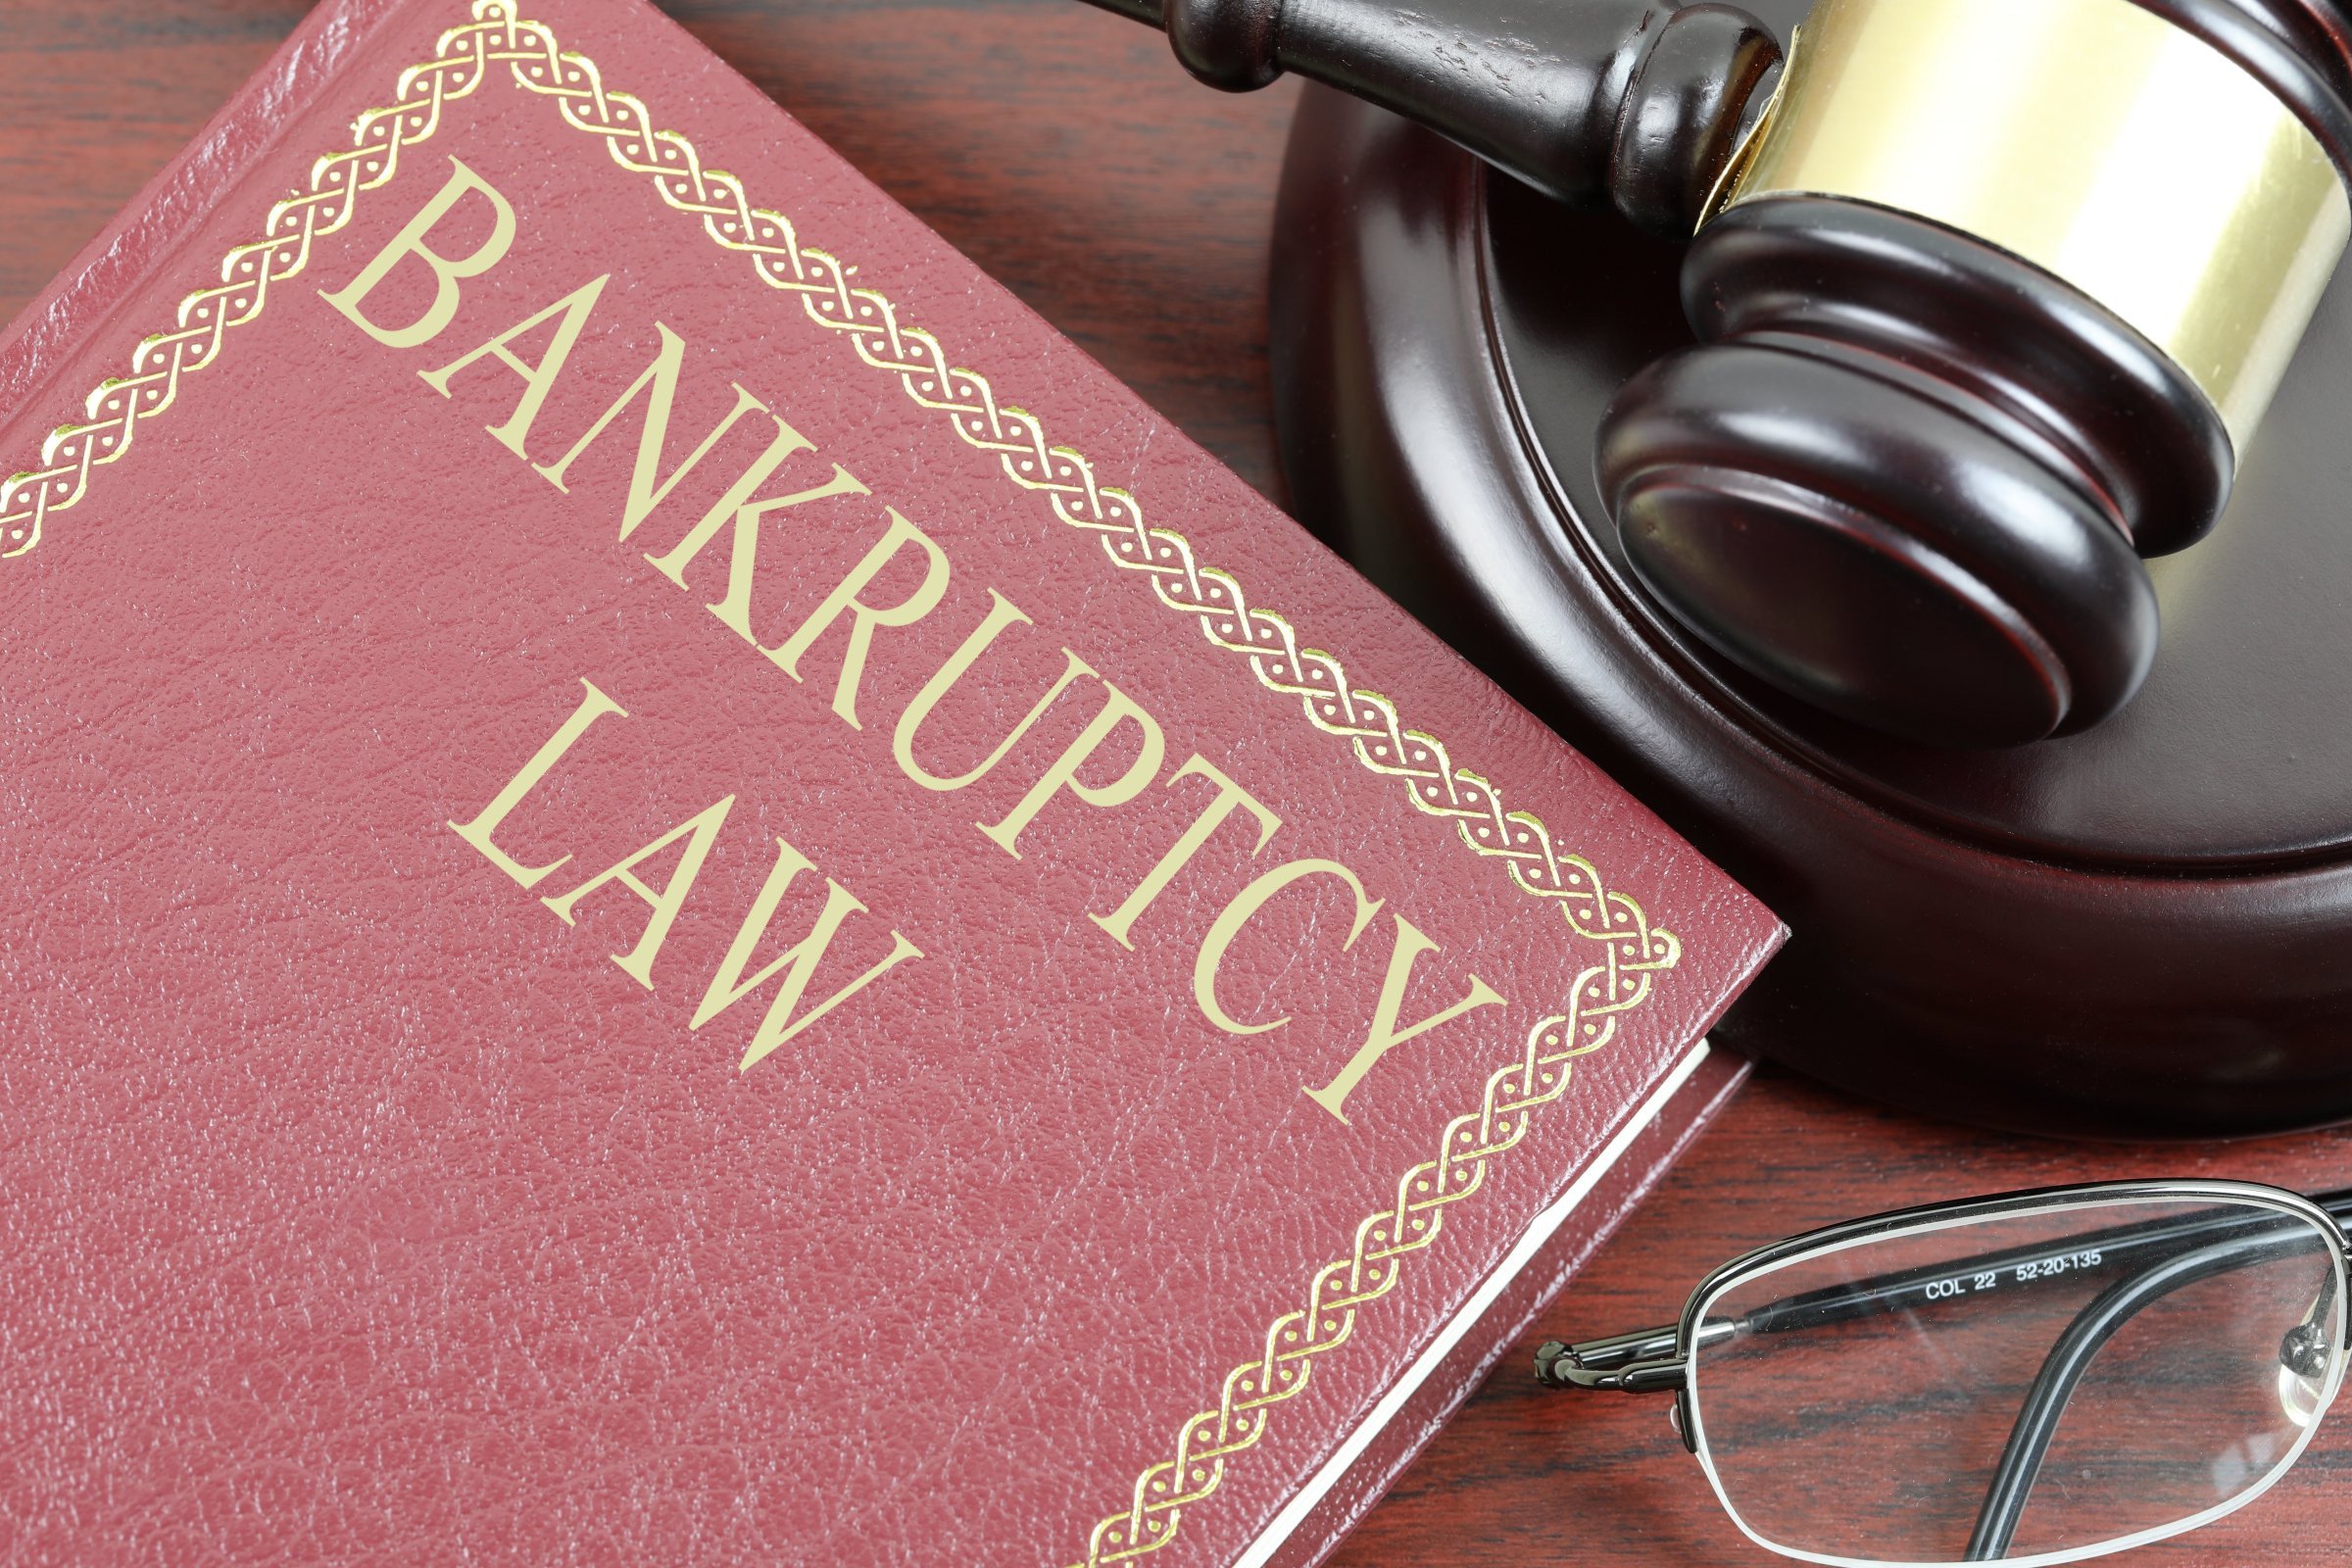 Bankruptcy Law Free of Charge Creative Commons Law book image